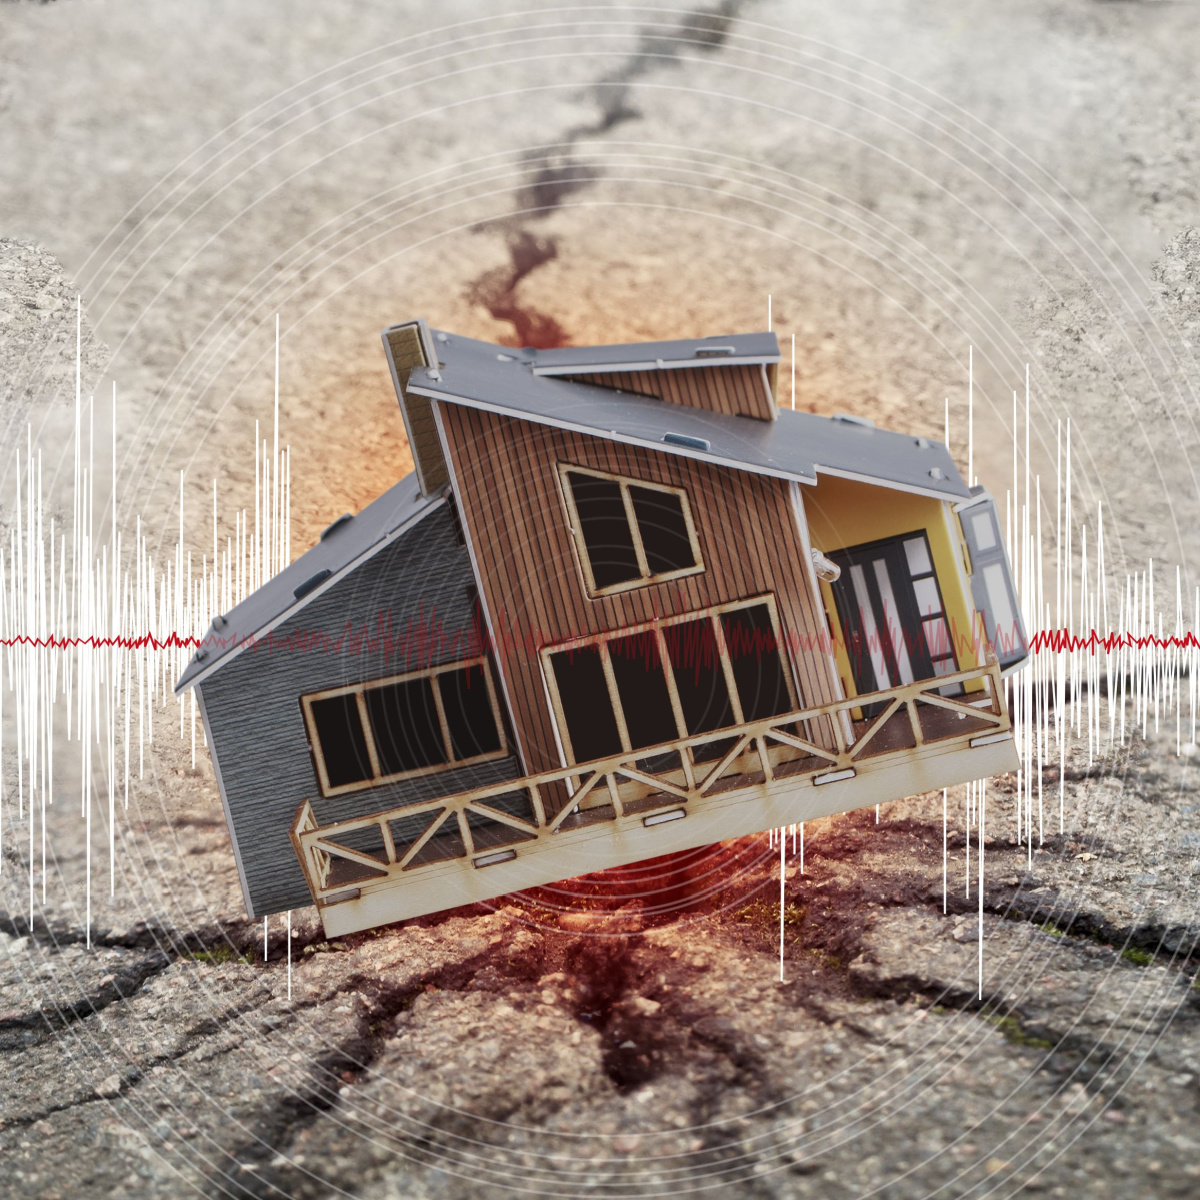 Essential Earthquake Prevention Tips From a Retrofitting Specialist